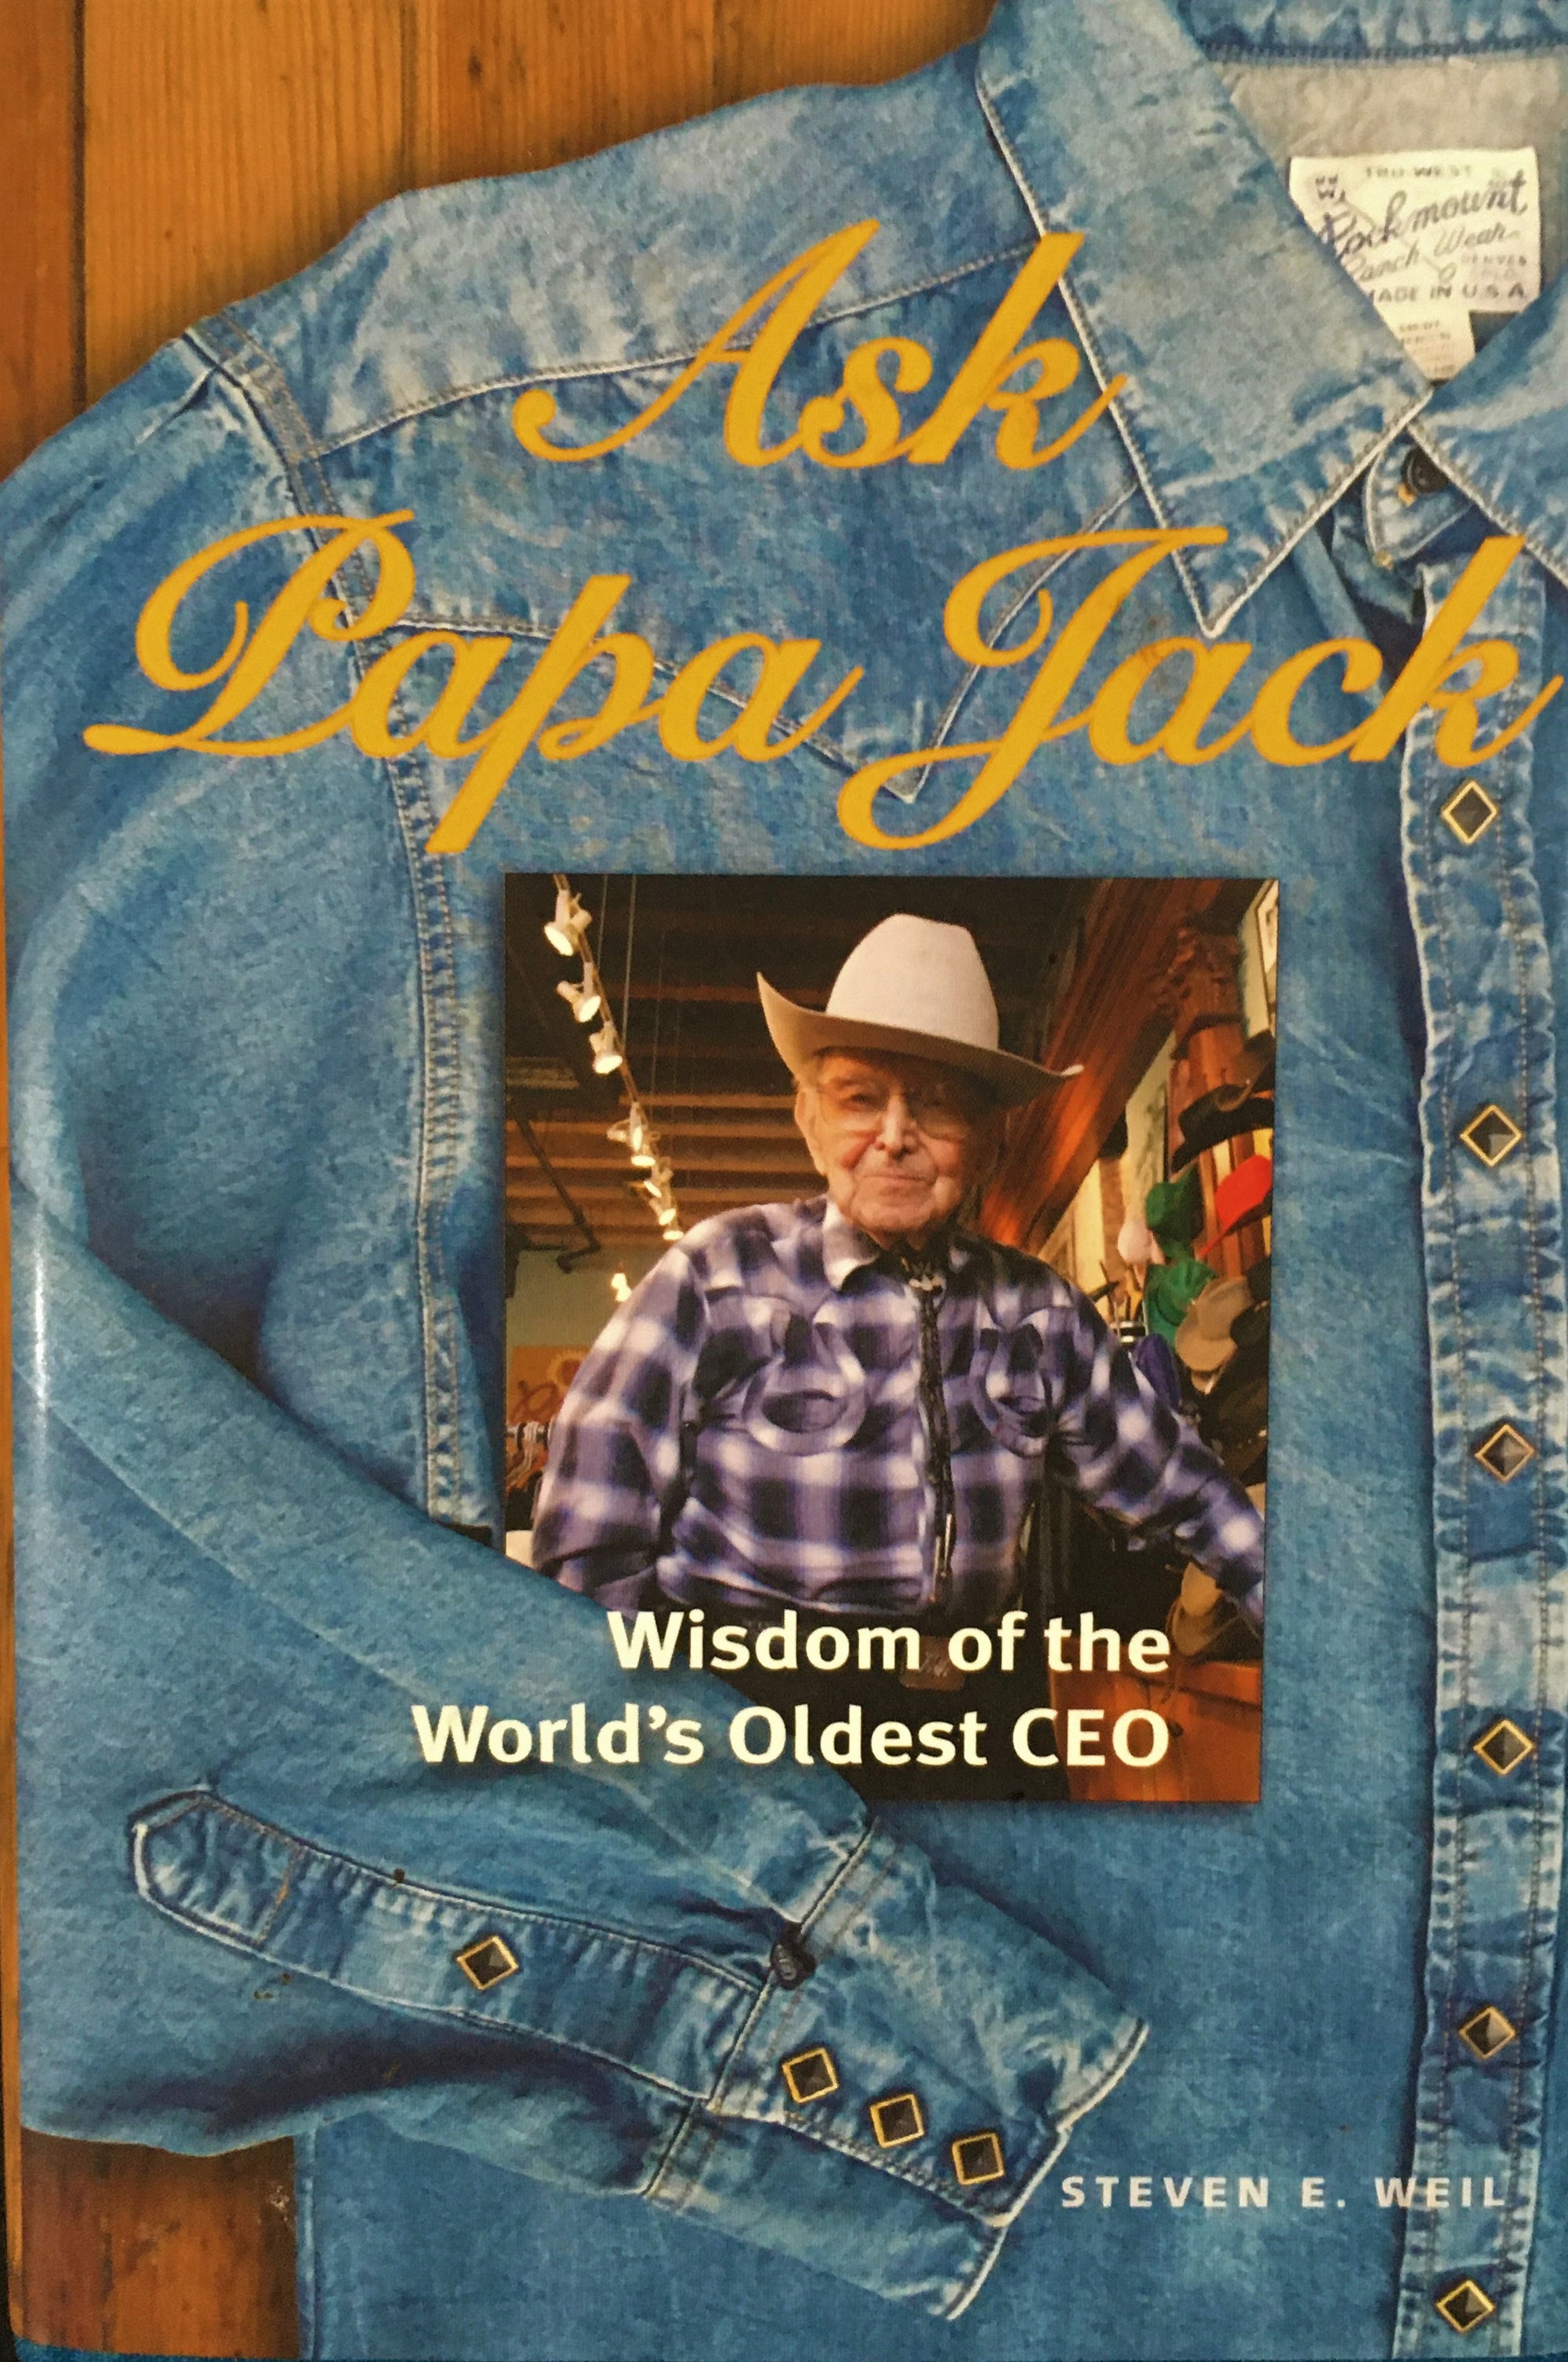 Ask Papa Jack by Steven E. Weil Book Cover